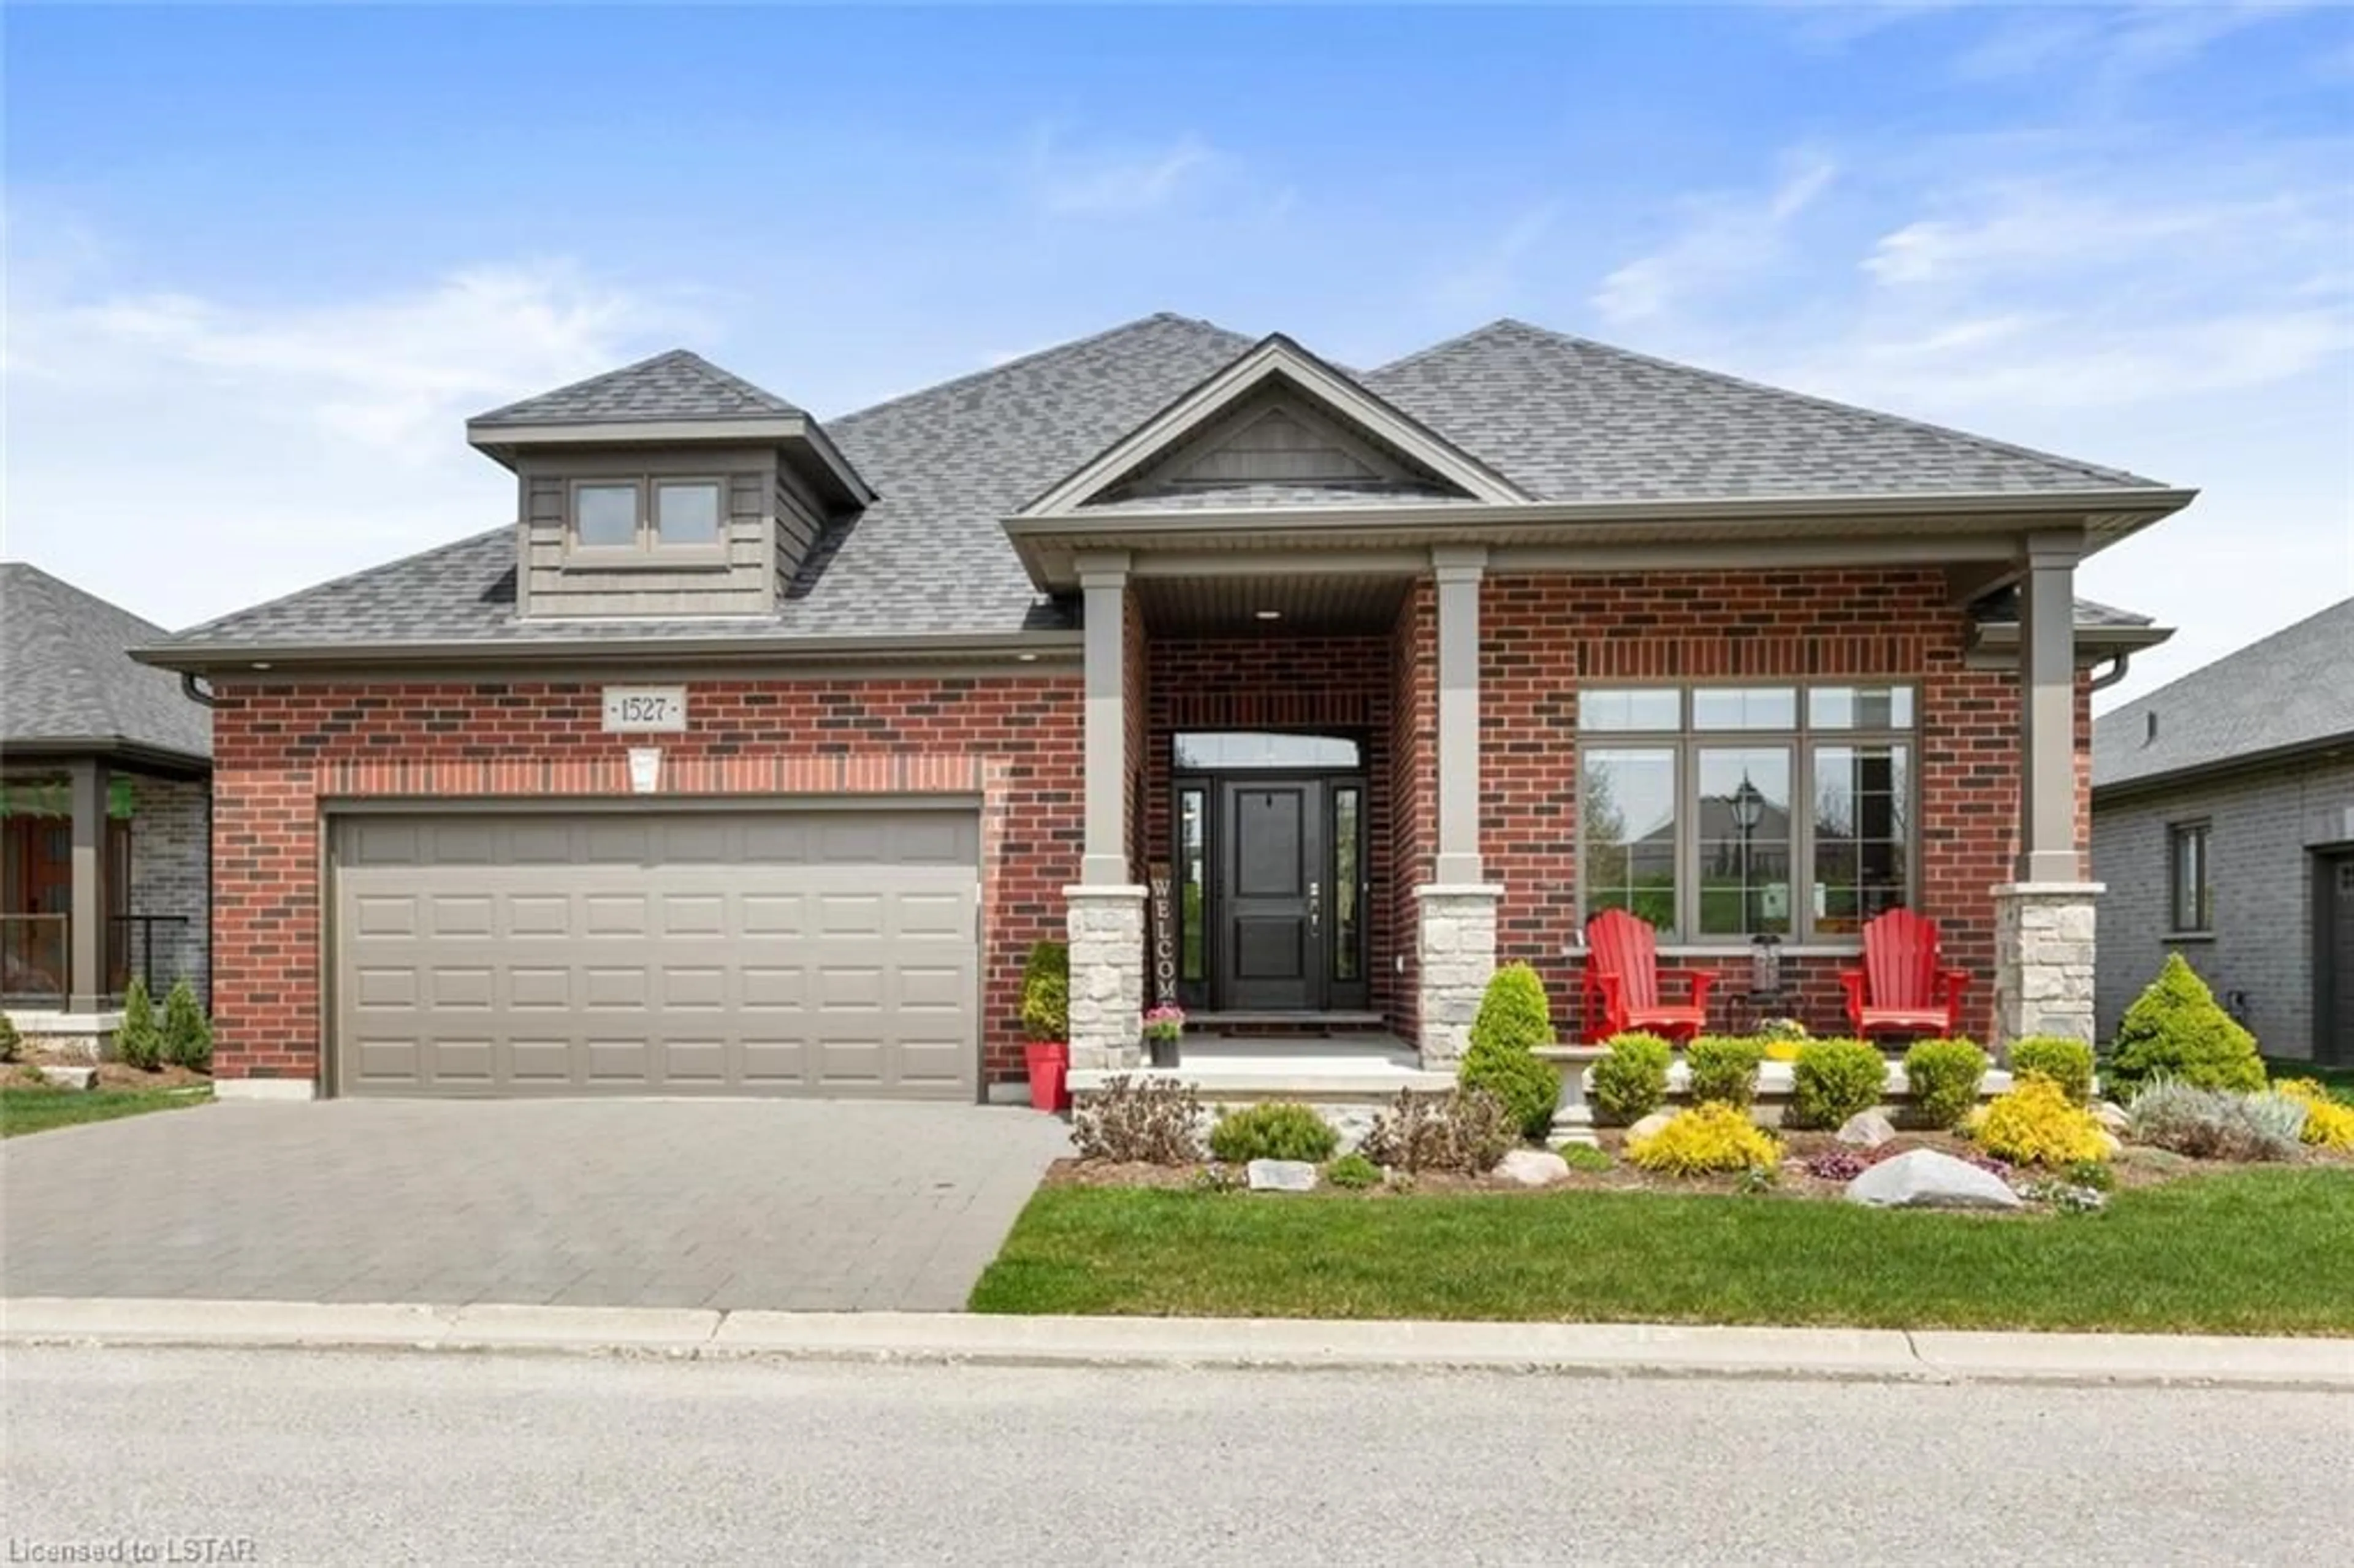 Home with brick exterior material for 1527 Moe Norman Pl, London Ontario N6K 5R5